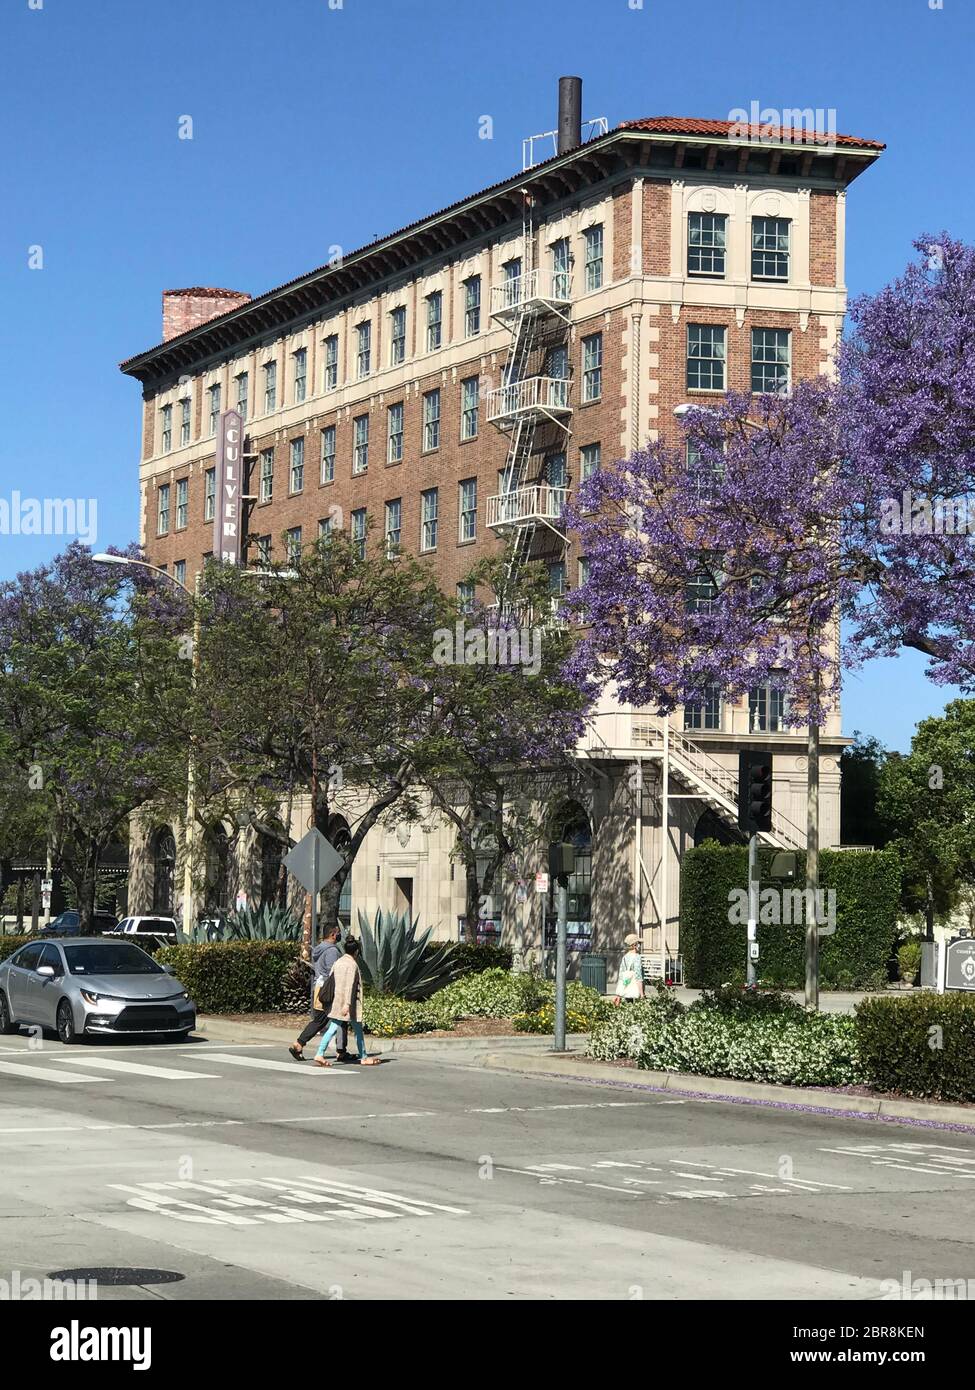 The historic Culver Hotel in downtwon Culver City, CA Stock Photo